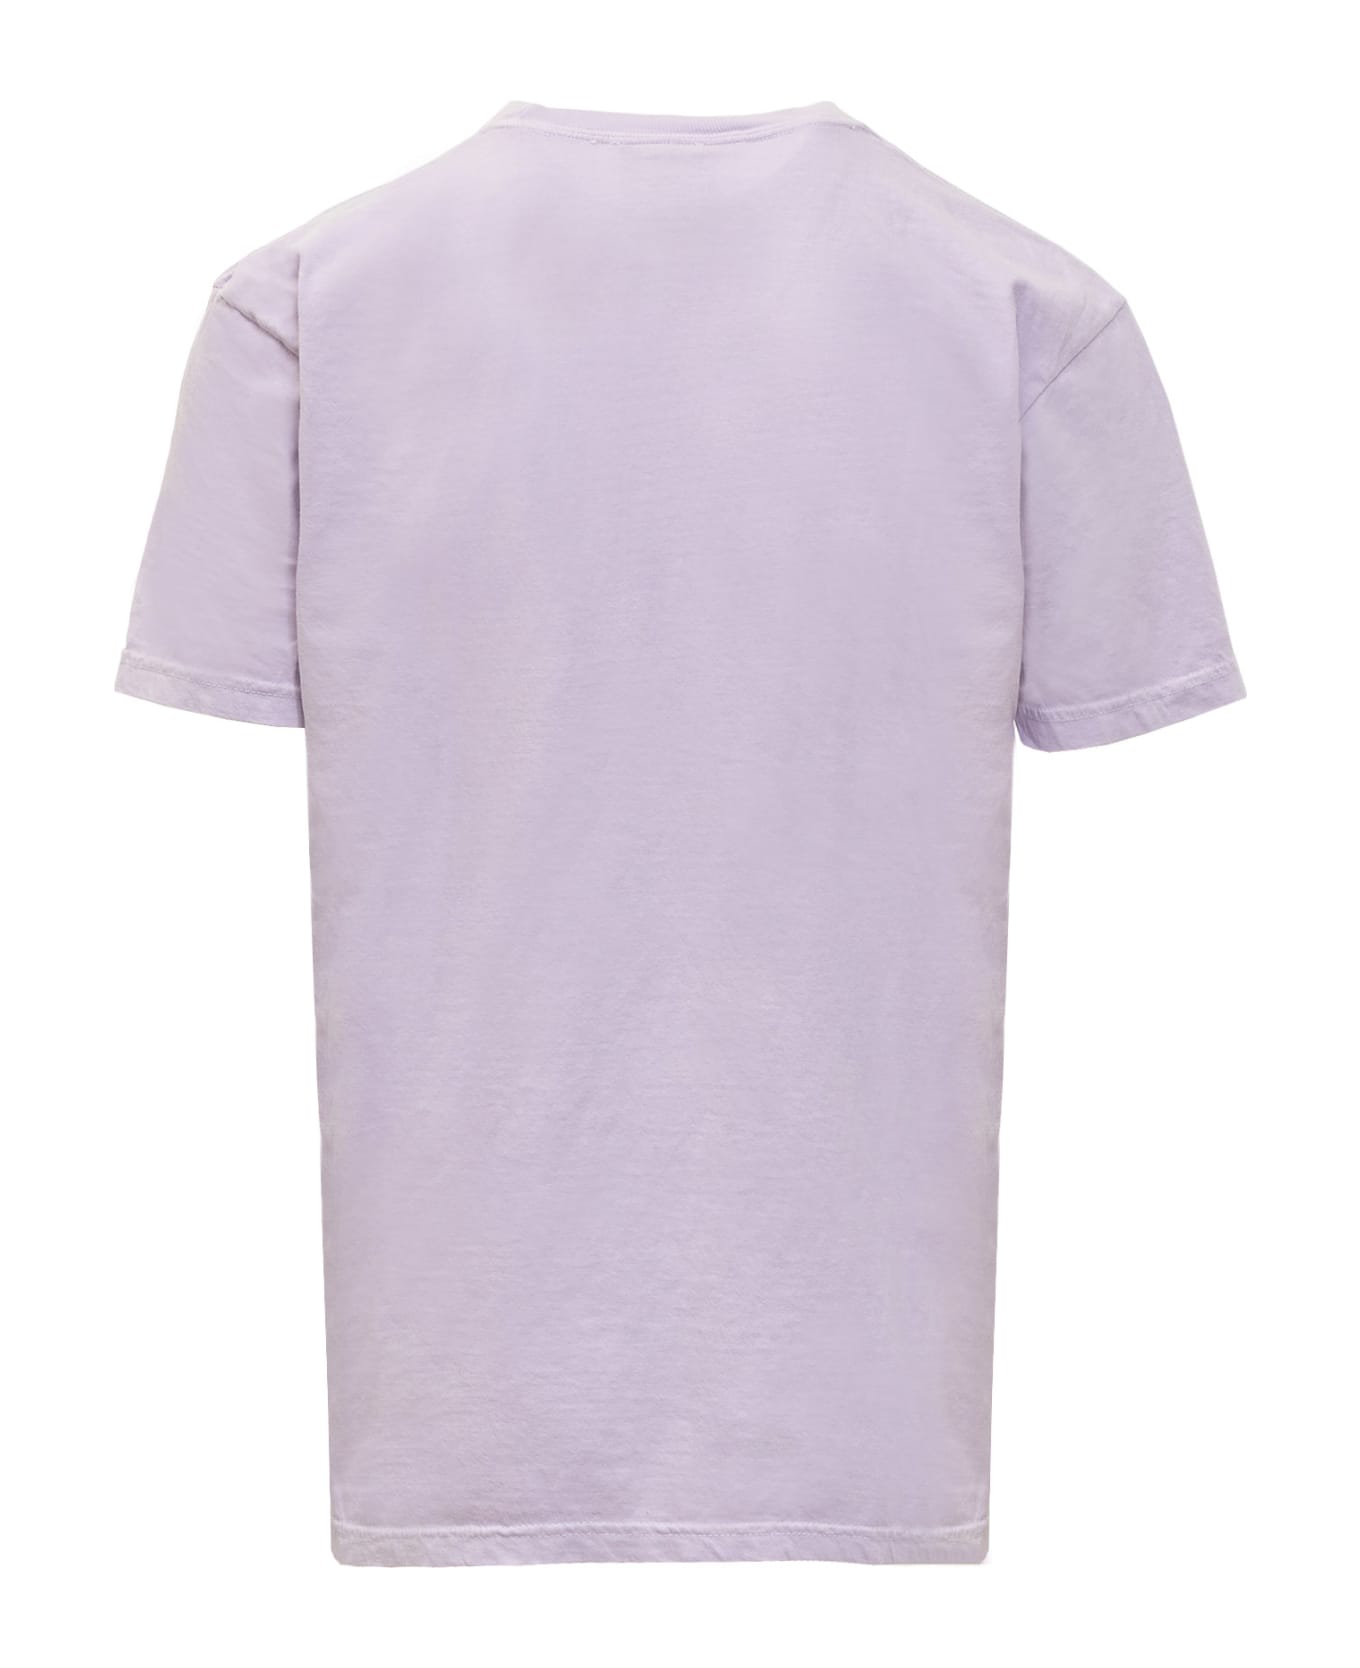 Kidsuper Thounght T-shirt - LILAC シャツ